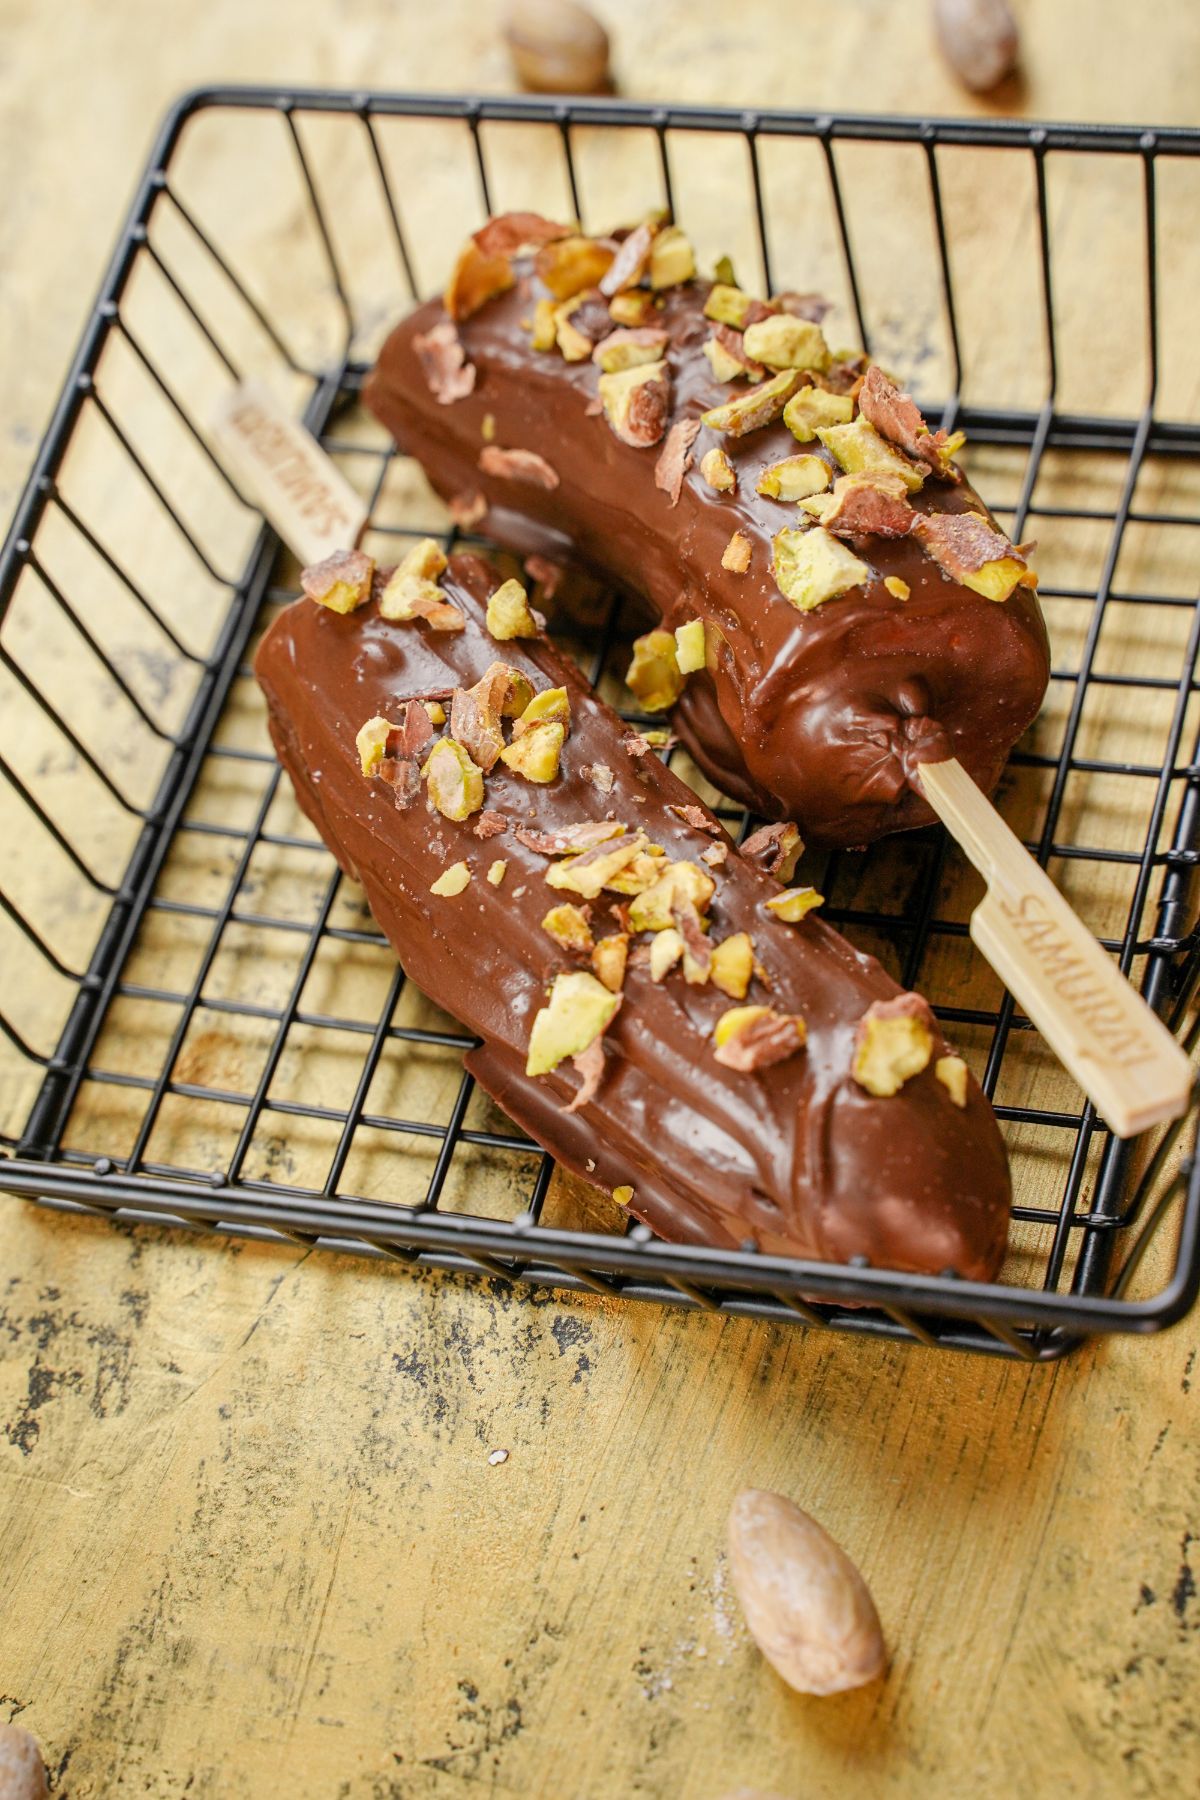 chocolate dipped banana pops with pistachio topping